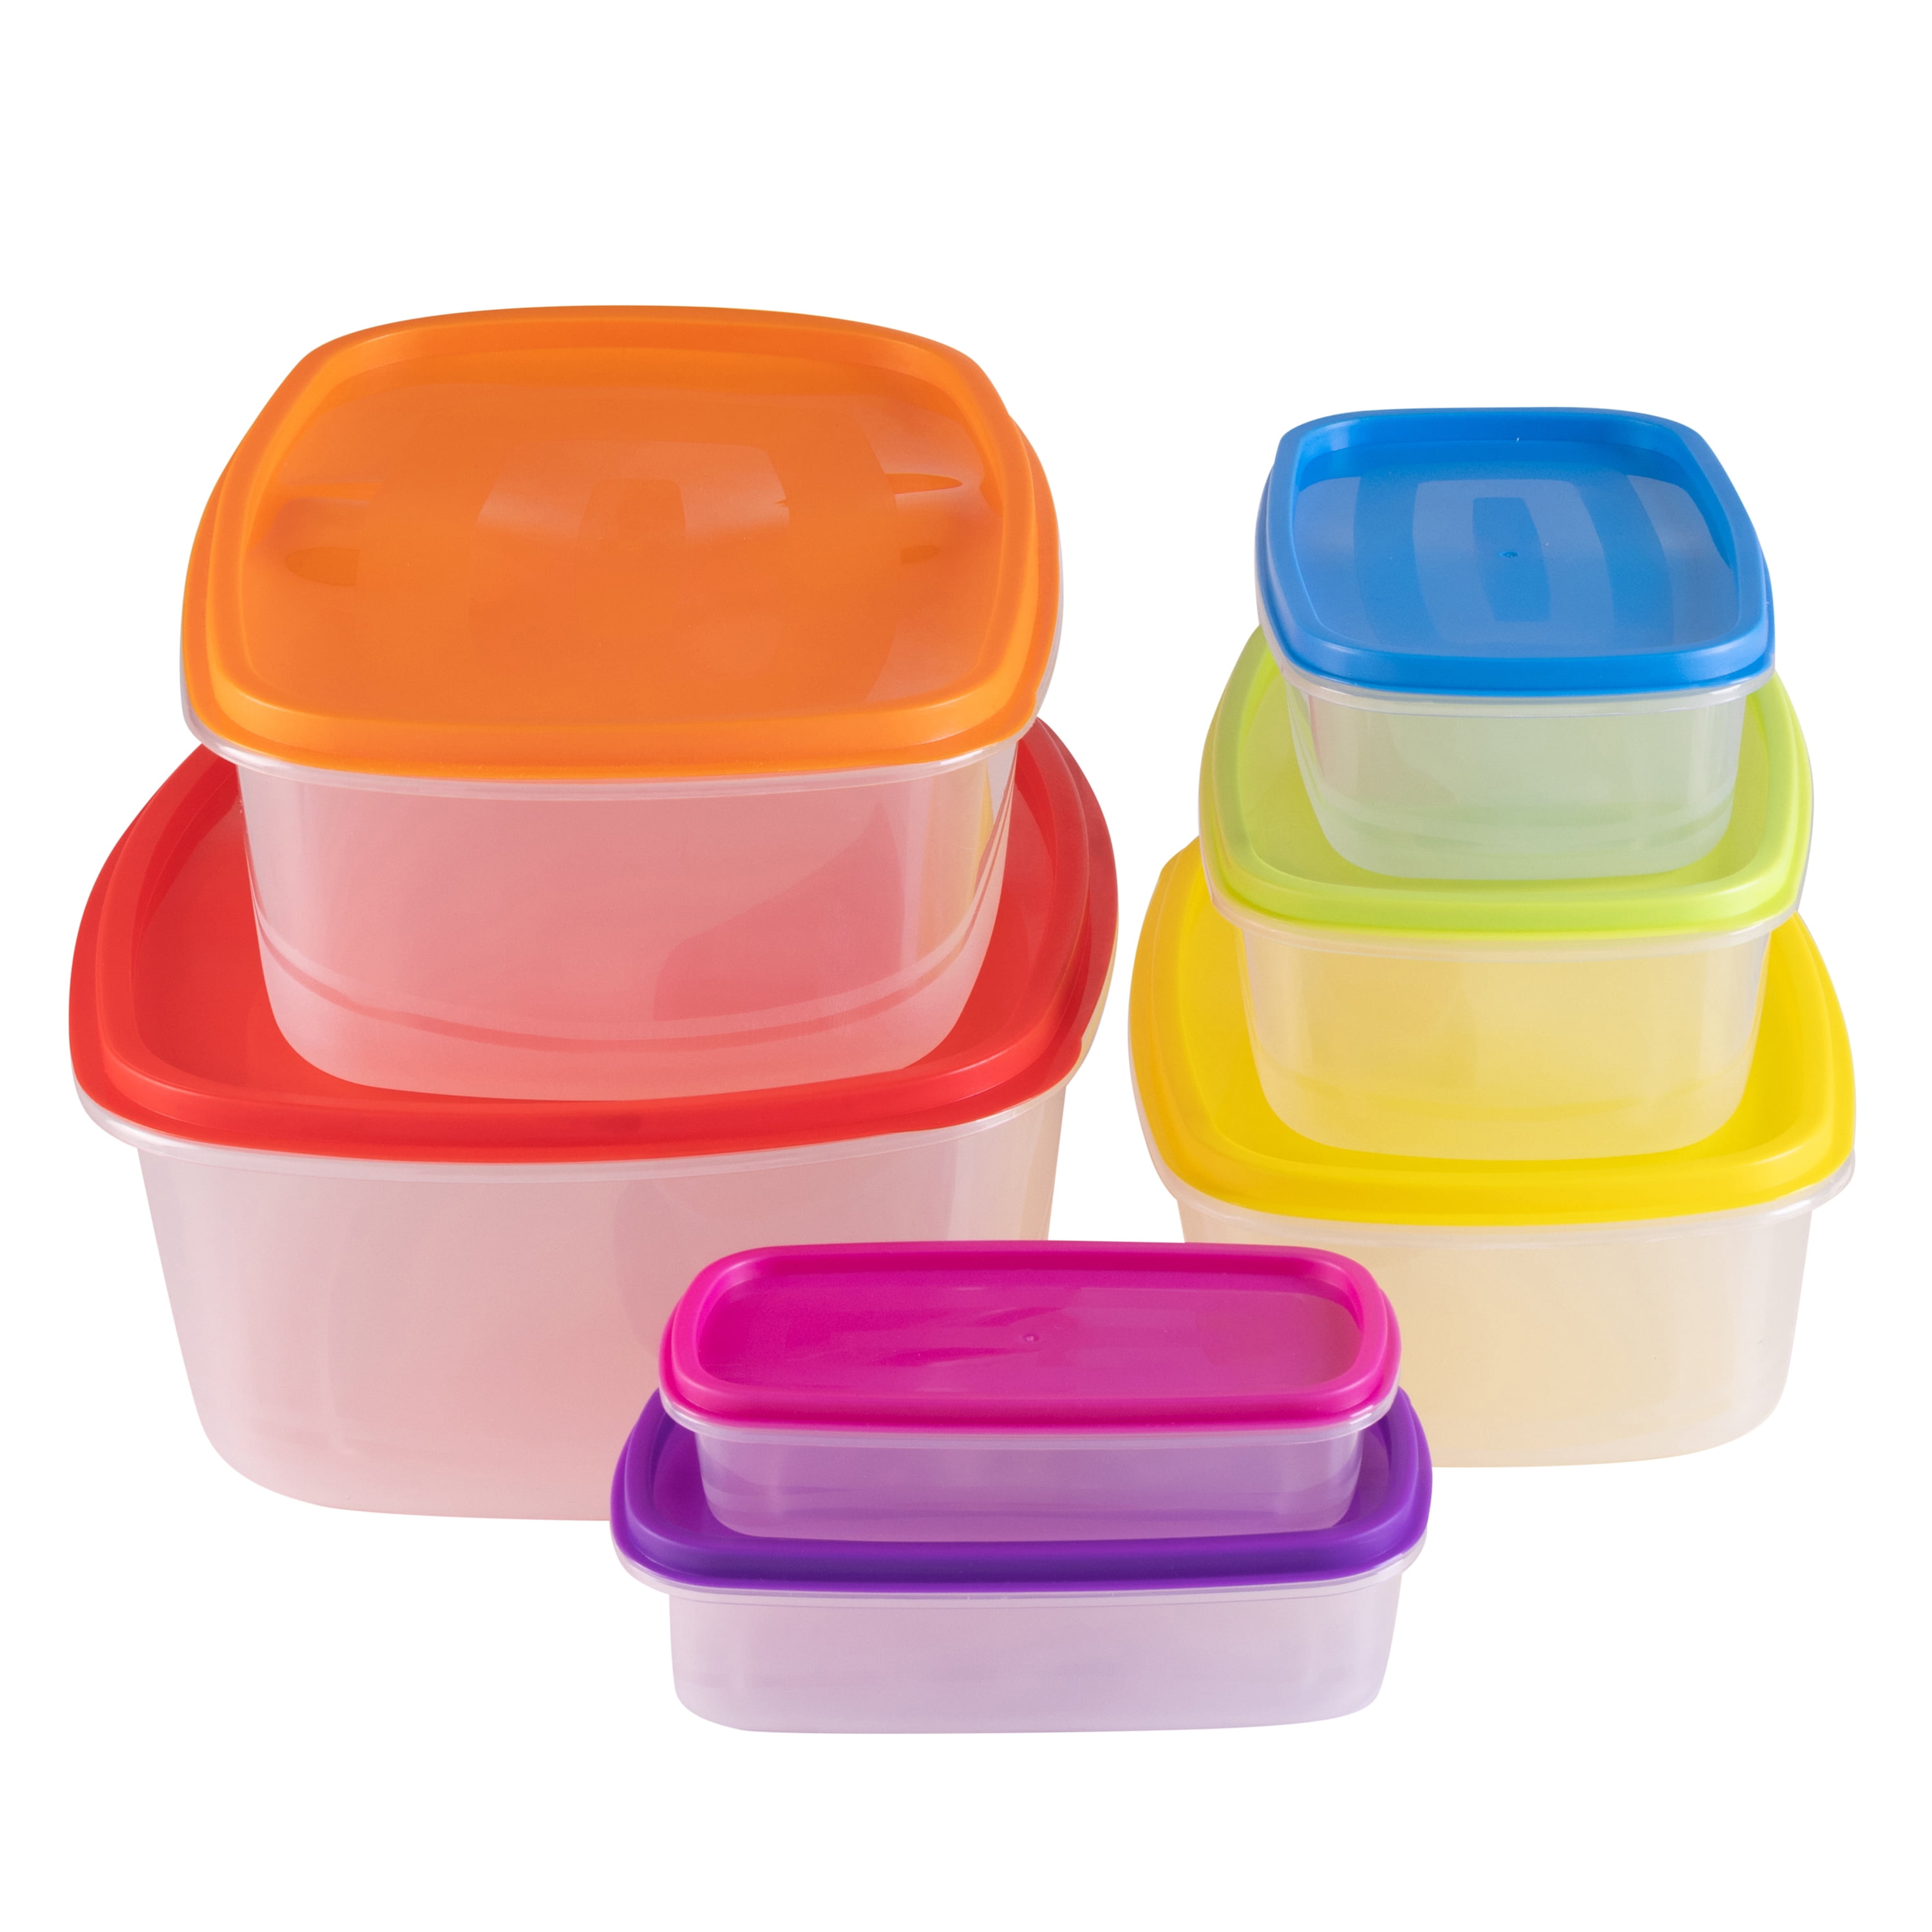 Holiday Home Nested Food Storage Set - 4 pc, 4 pc - Kroger